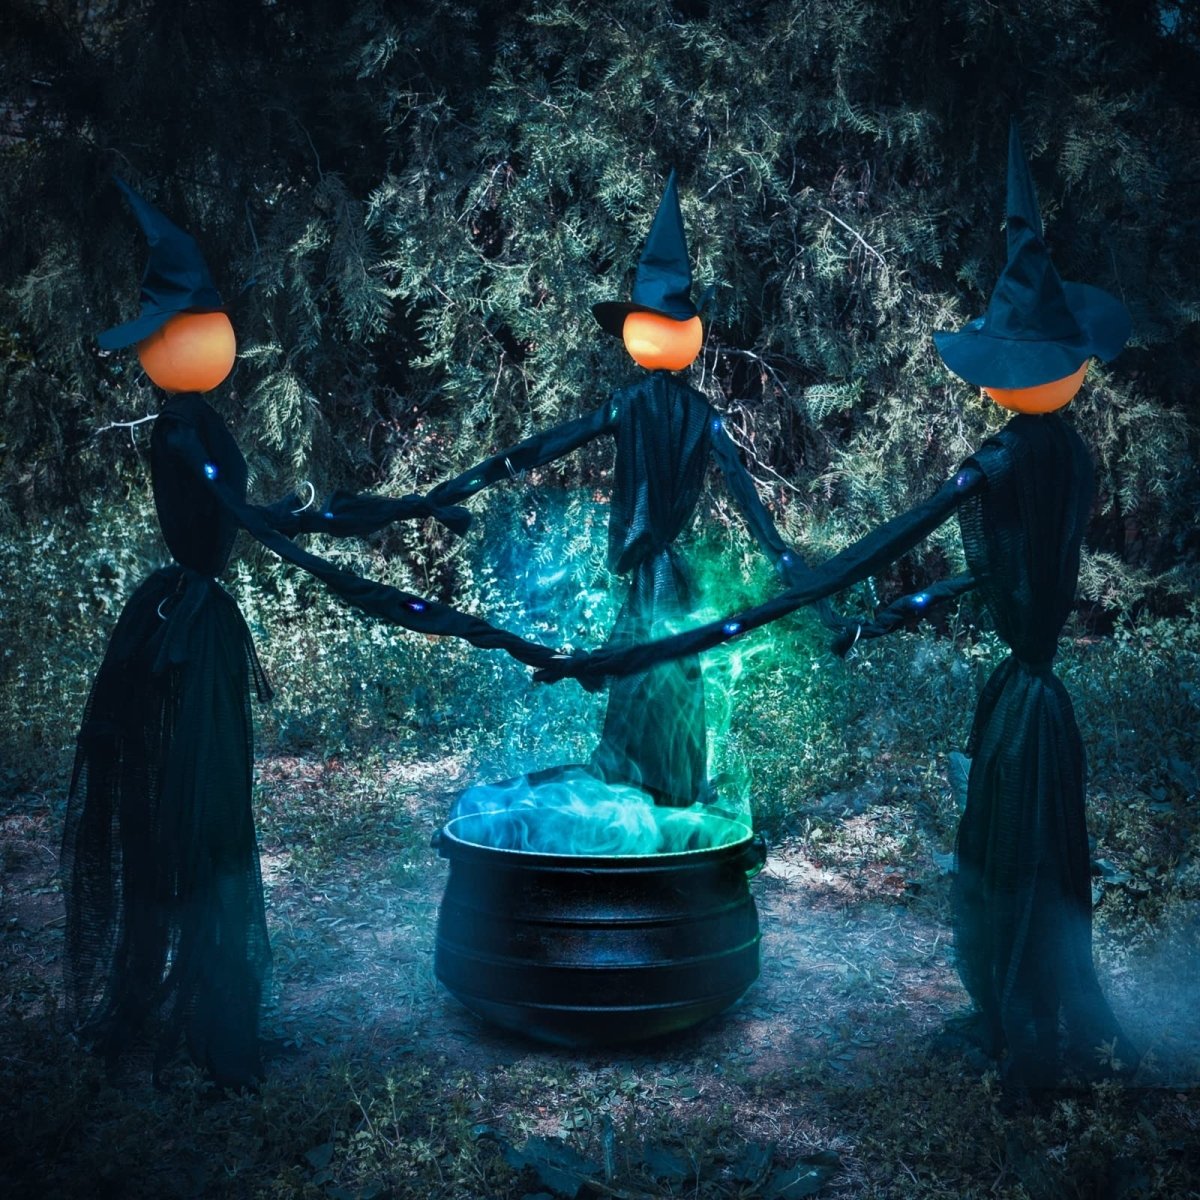 https://cdn.shopify.com/s/files/1/0484/0004/0096/products/led-hand-holding-halloween-witch-decor-3-pcs-wholesale-733664_1600x.jpg?v=1660260052